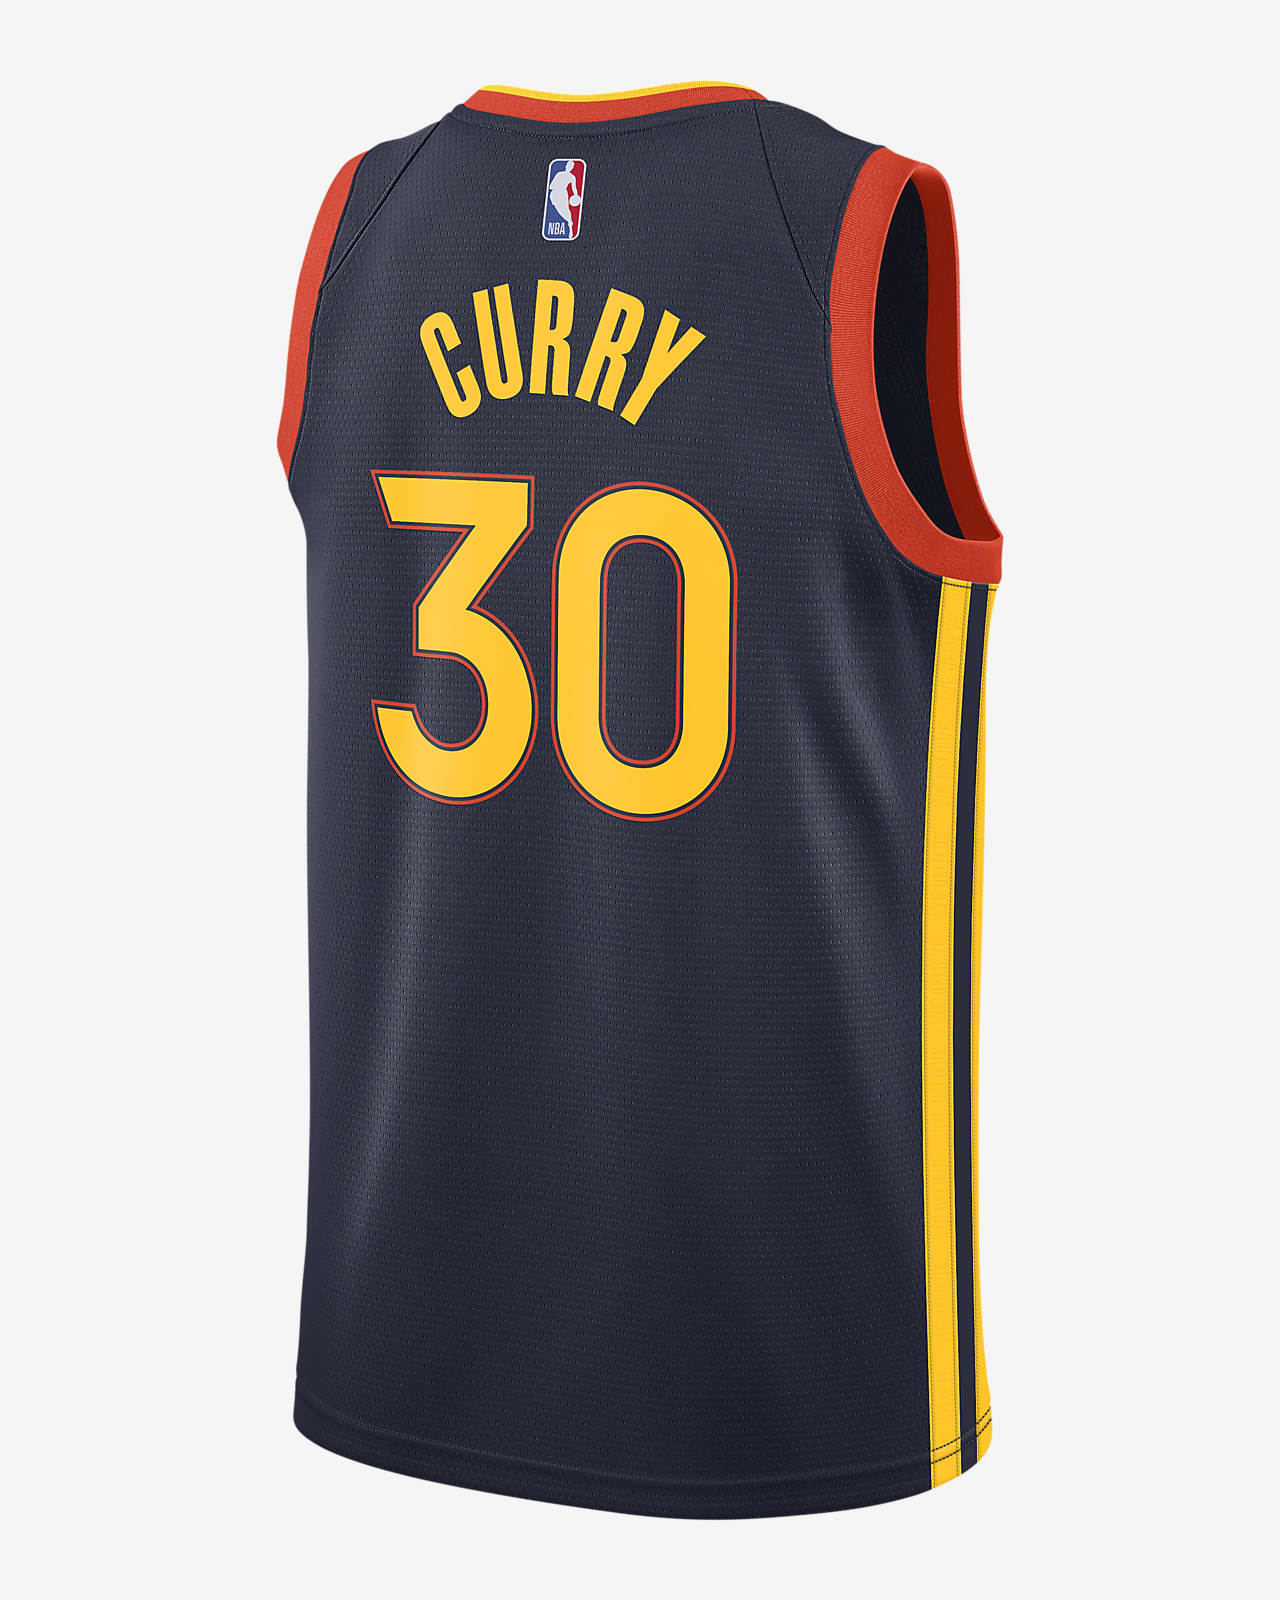 golden state warriors official jersey,Save up to 15%,www.ilcascinone.com